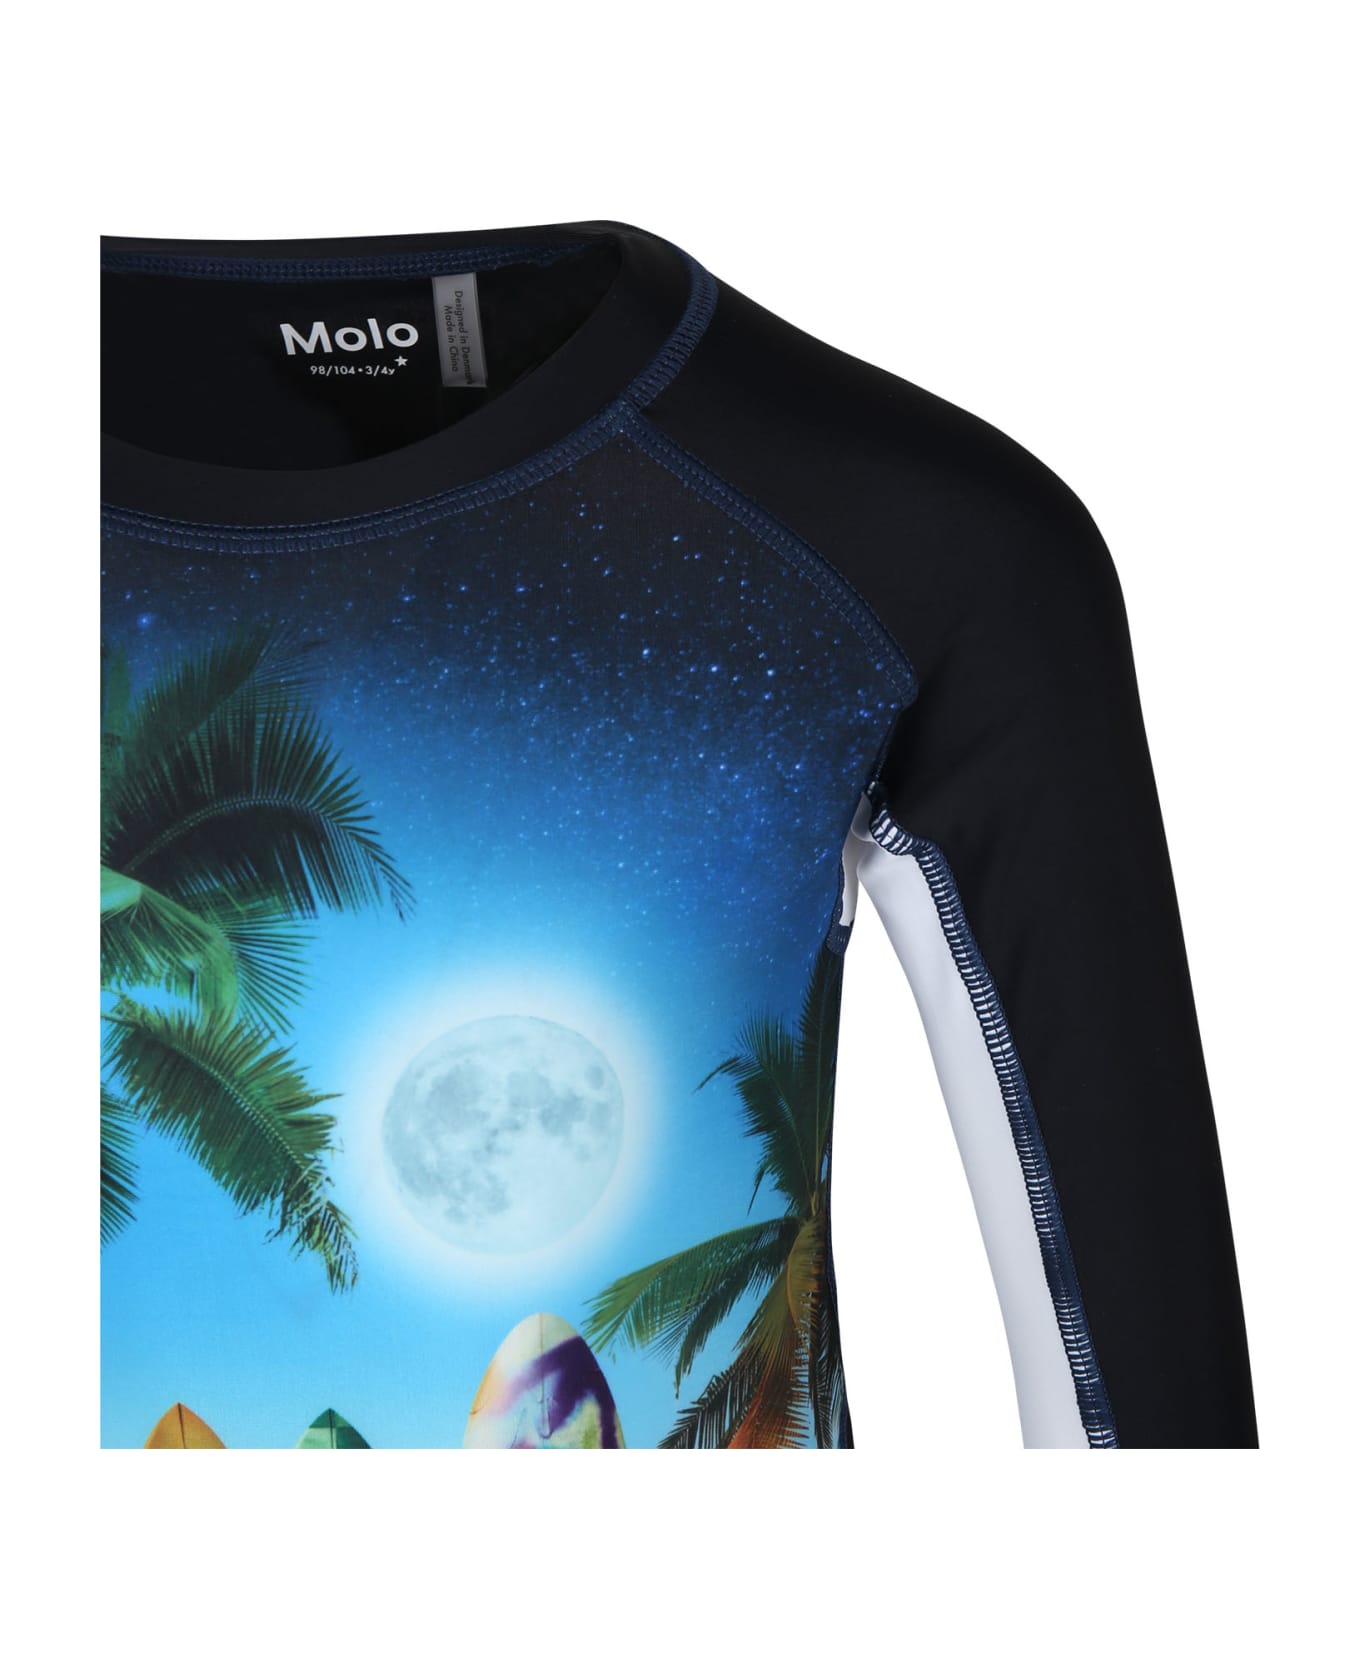 Molo Black T-shirt For Boy With Surfboard Print - Black